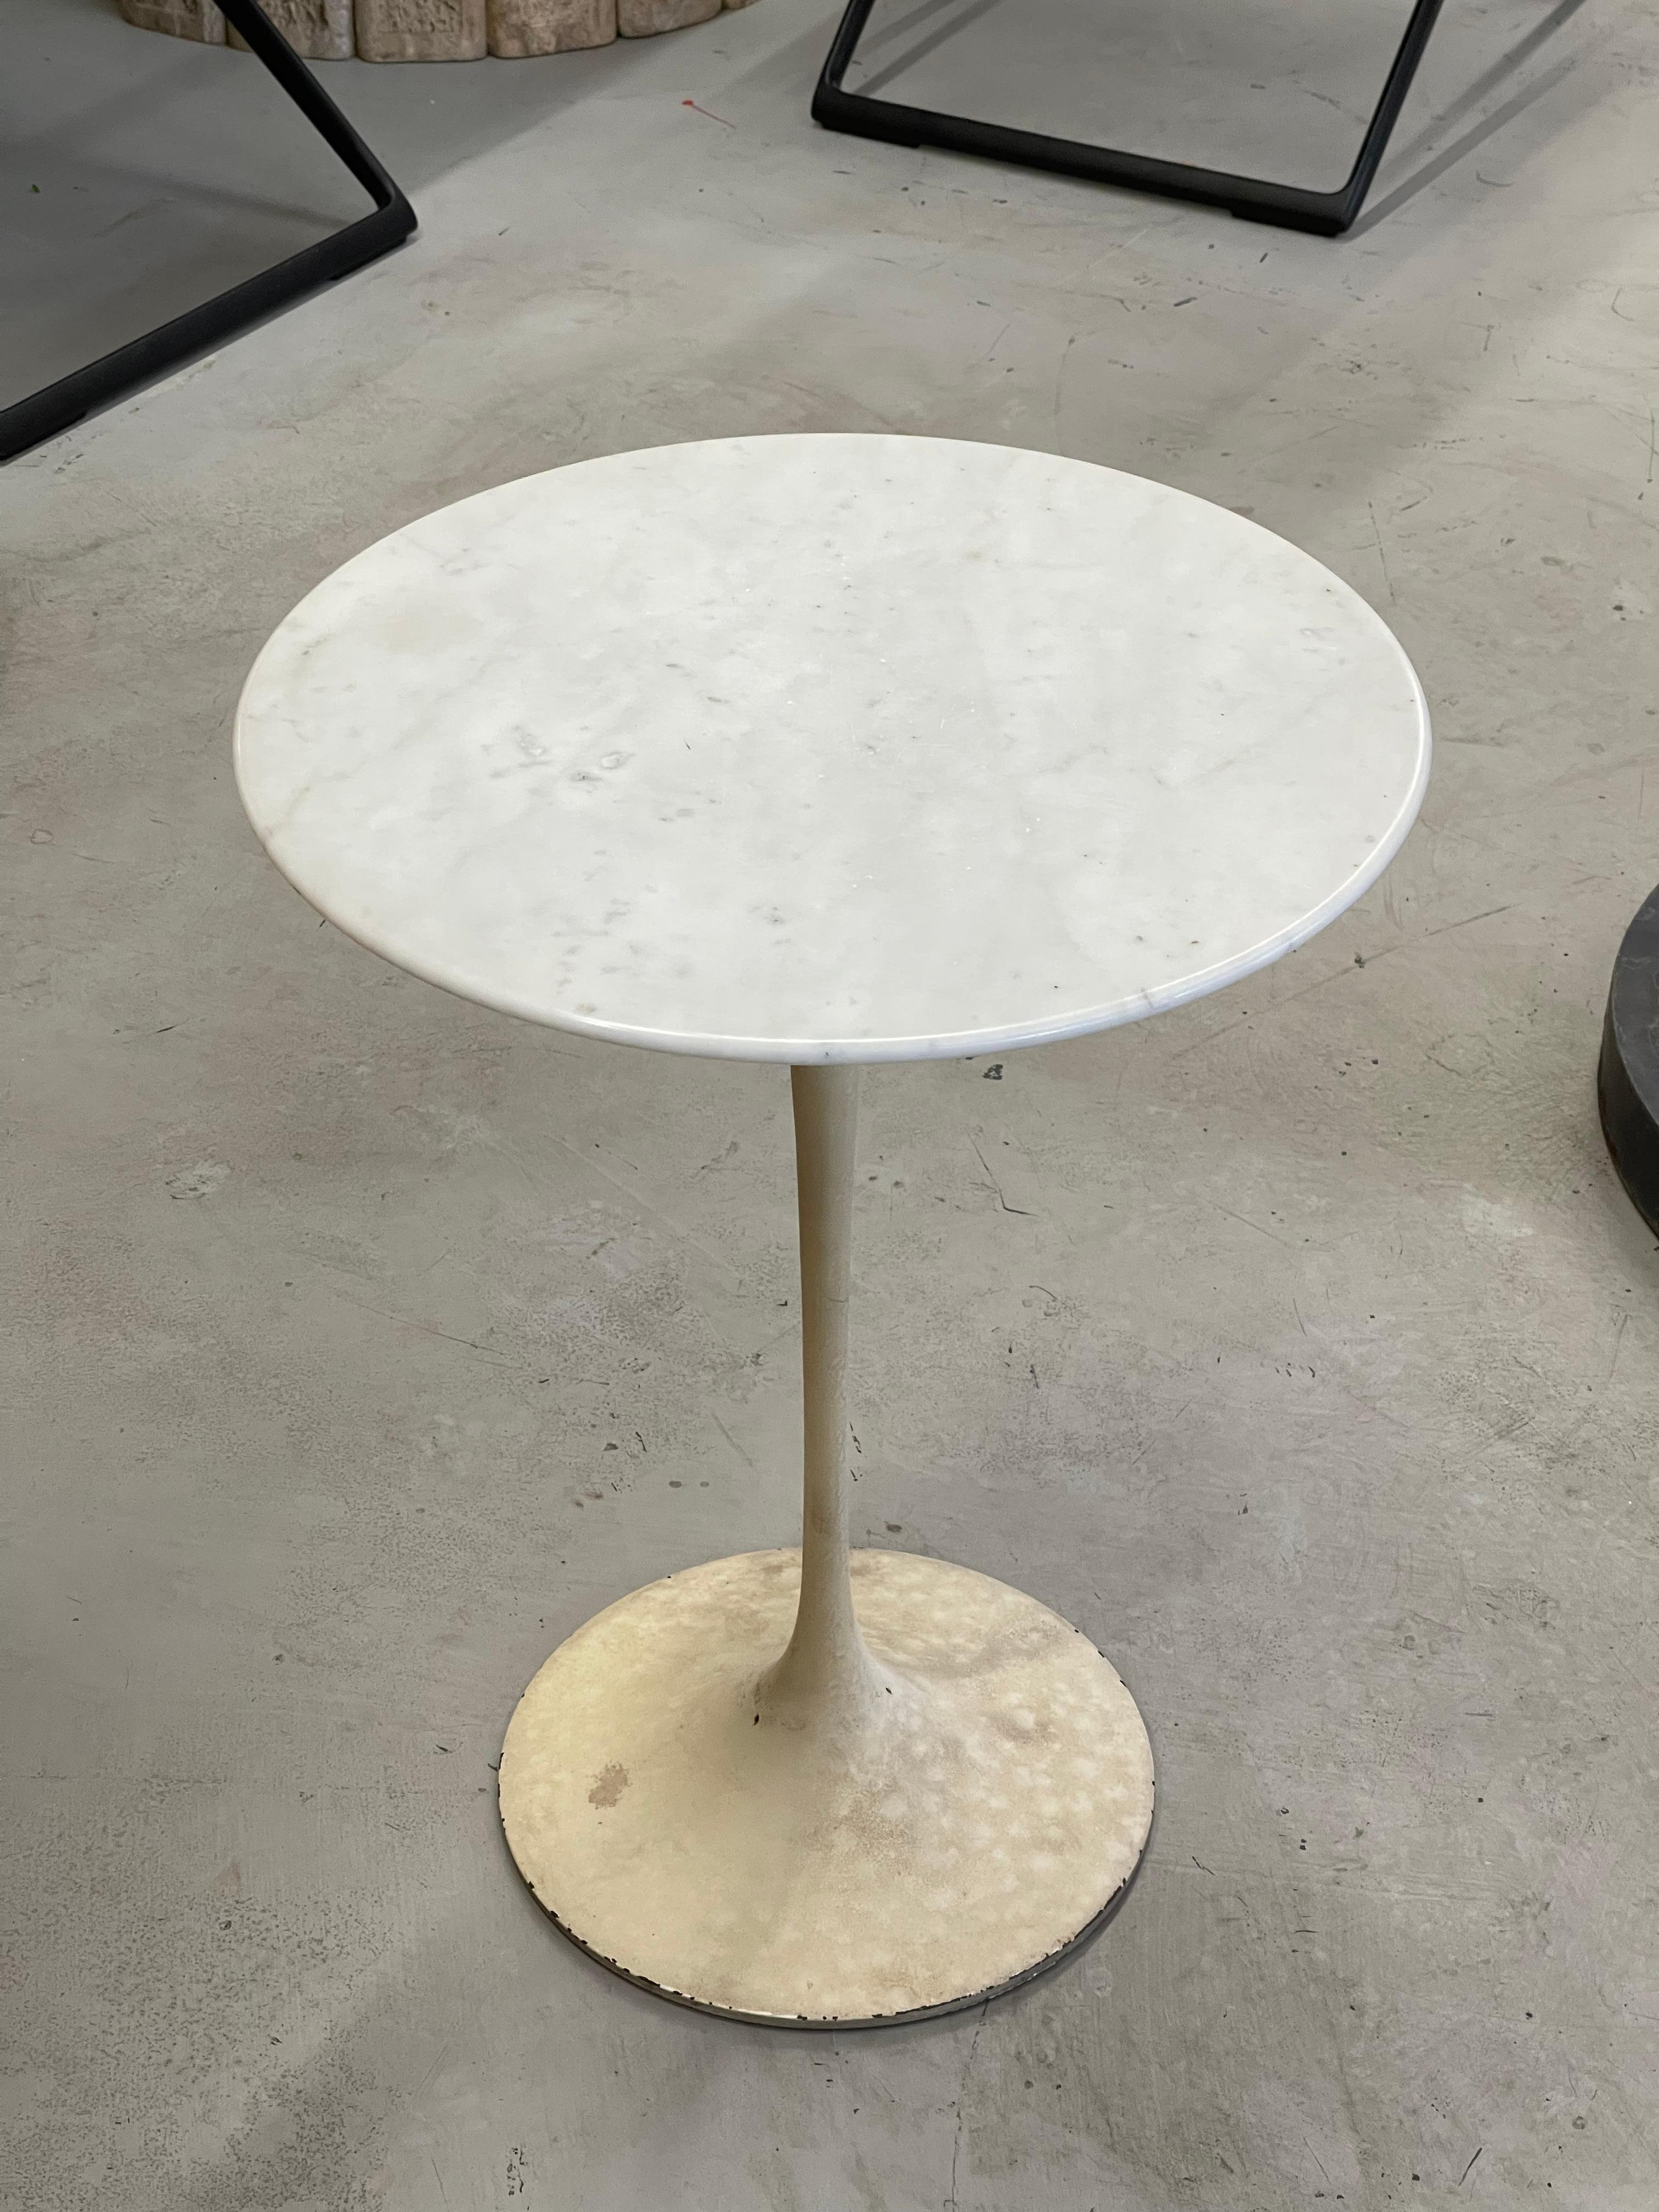 An extremely early production Knoll Eero Saarinen Tulip table. Bears a 575 Madison Ave New York 22 label. Marble Top is 16 inches in diameter. Slightly over 20 inches tall. The base is dirty but we elected not to repaint it due to its rarity. Top is